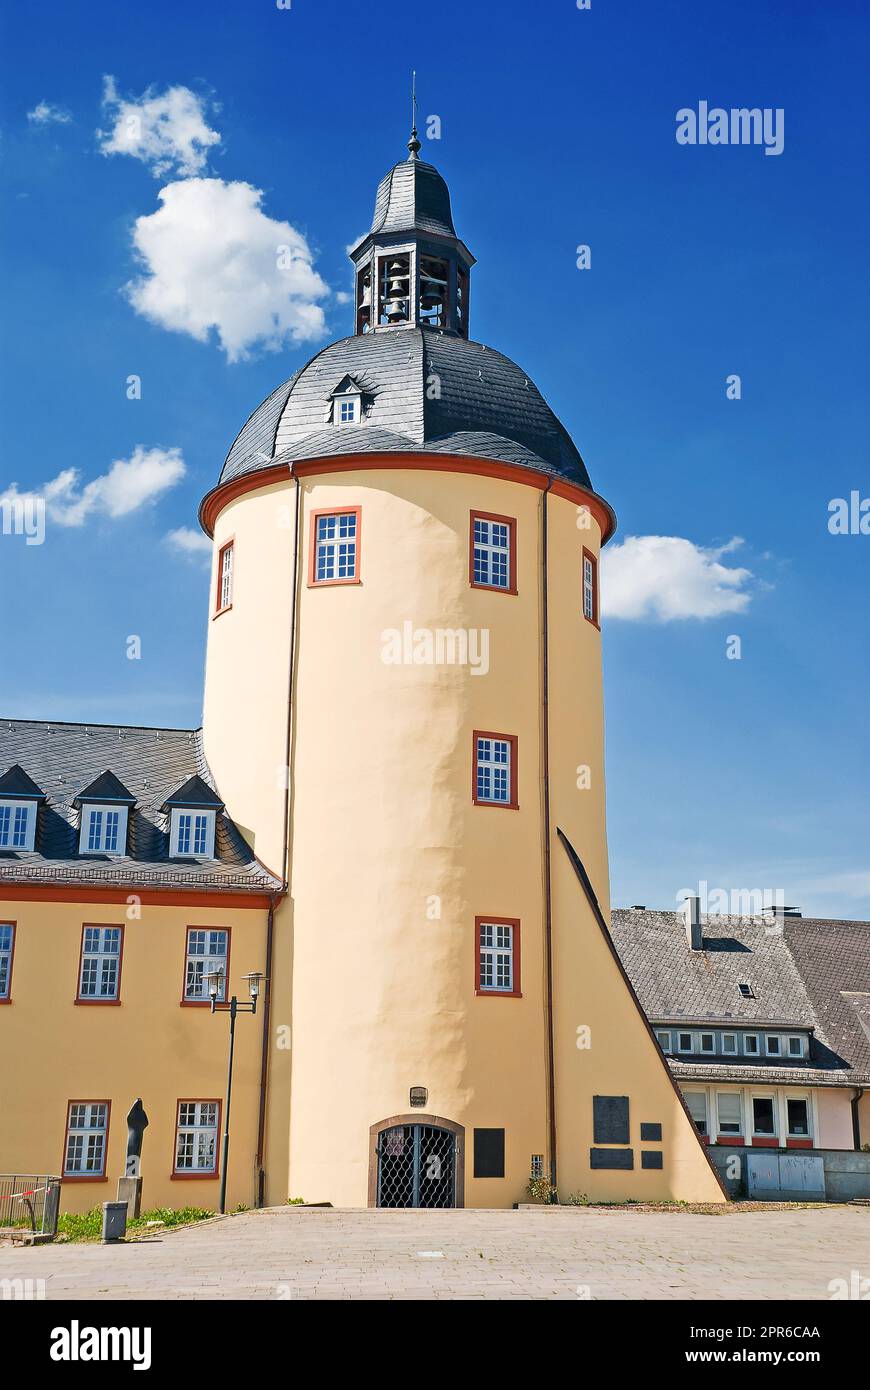 The Fat Tower of the Unteres Schloss castle at Siegen in the state of North Rhine-Westphalia in Germany Stock Photo